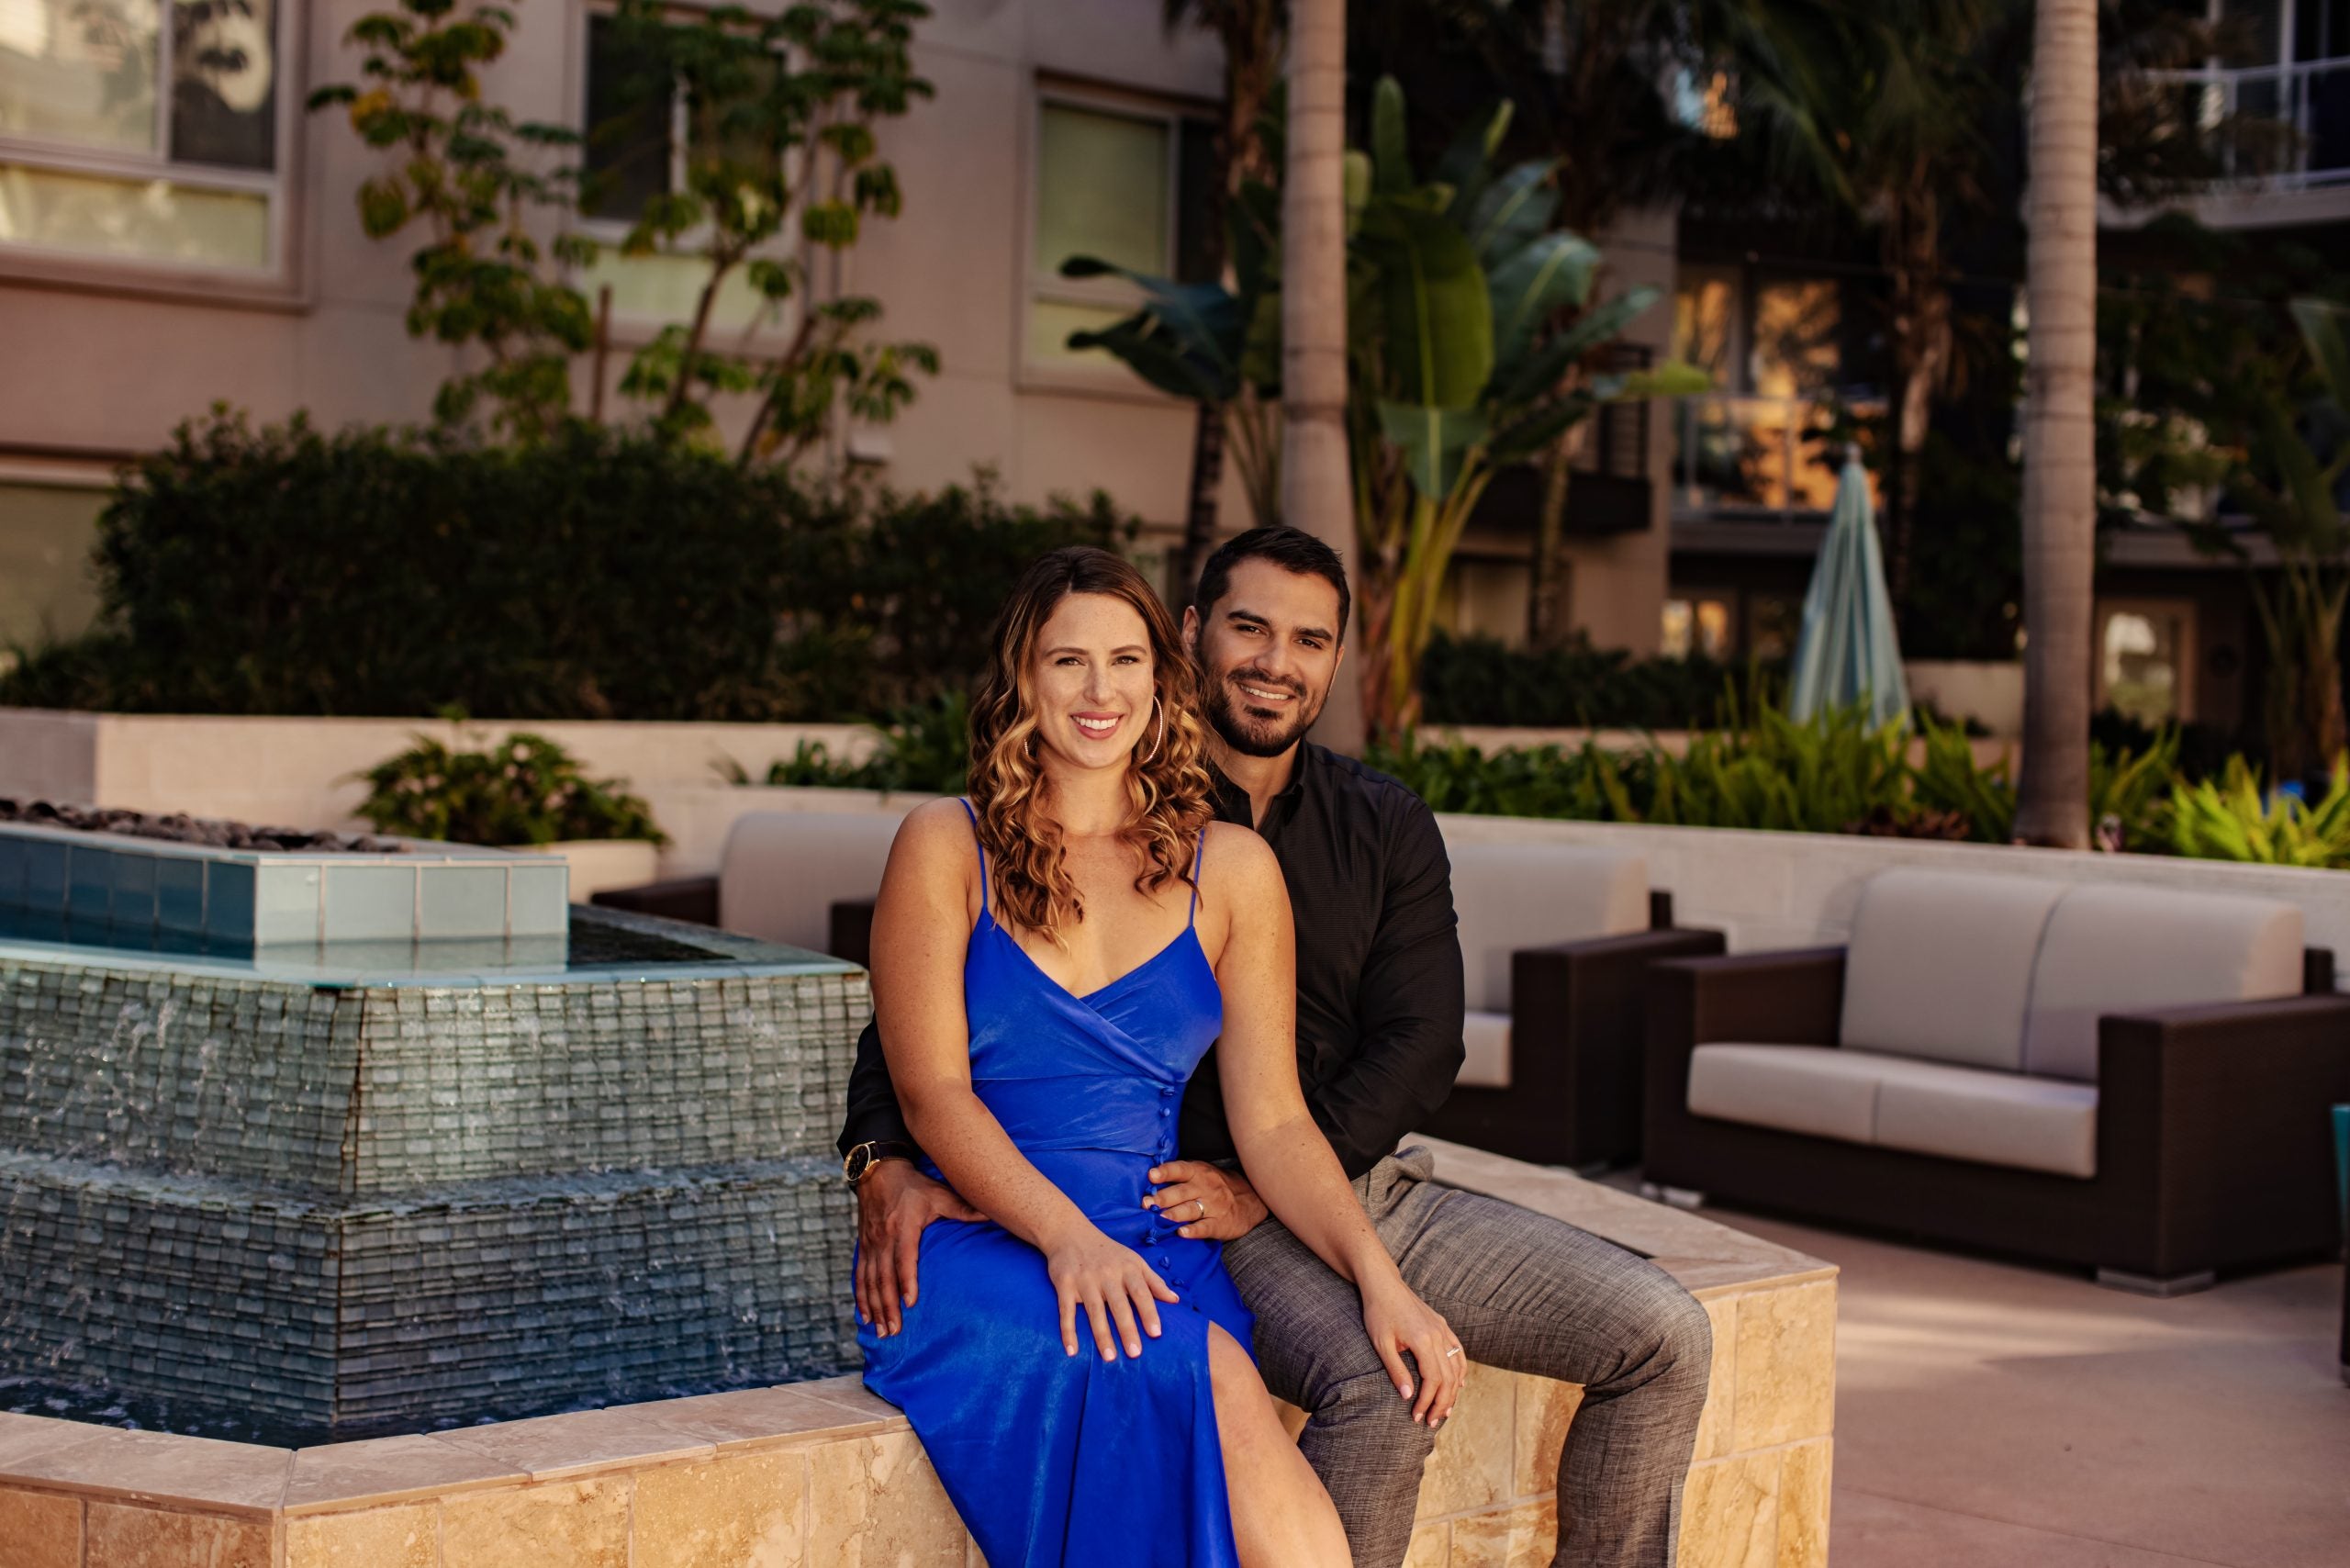 Lindy, wearing a blue dress, sitting in front of Miguel, from 'Married at First Sight' Season 15